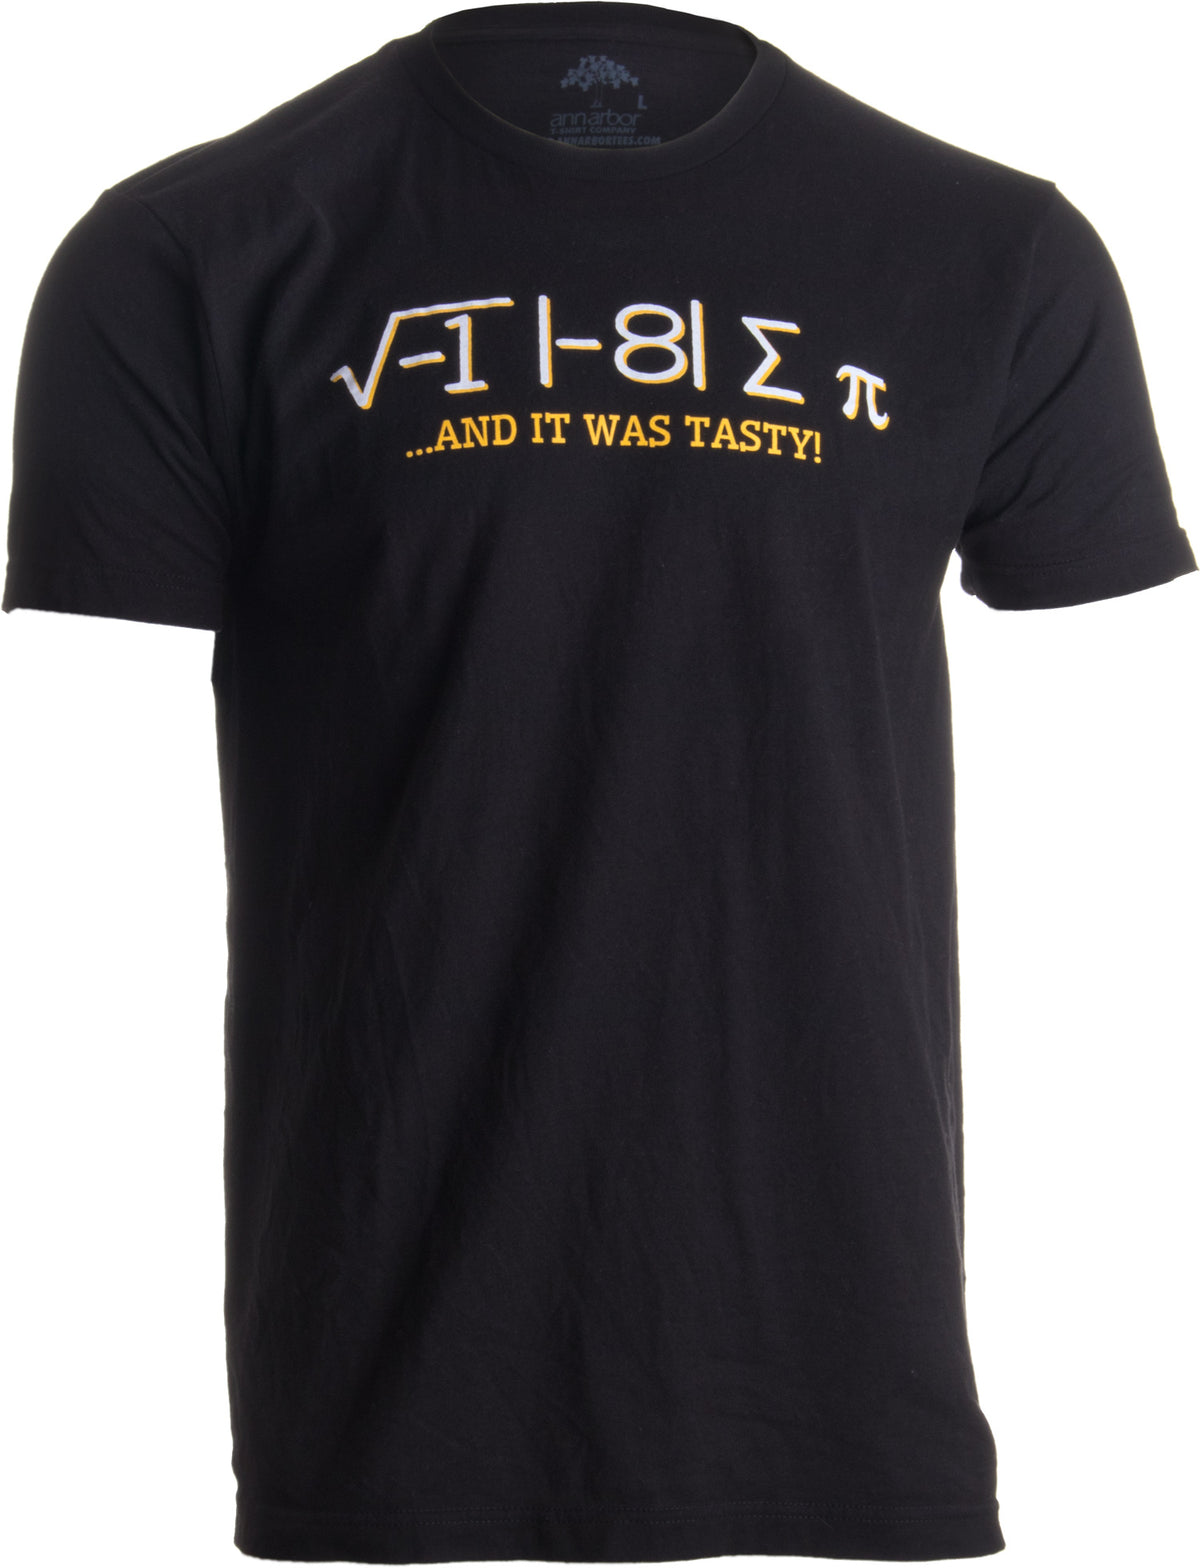 I Ate Some Pi, and it was Tasty | Funny Delicious Math Teacher Humor Pun T-shirt